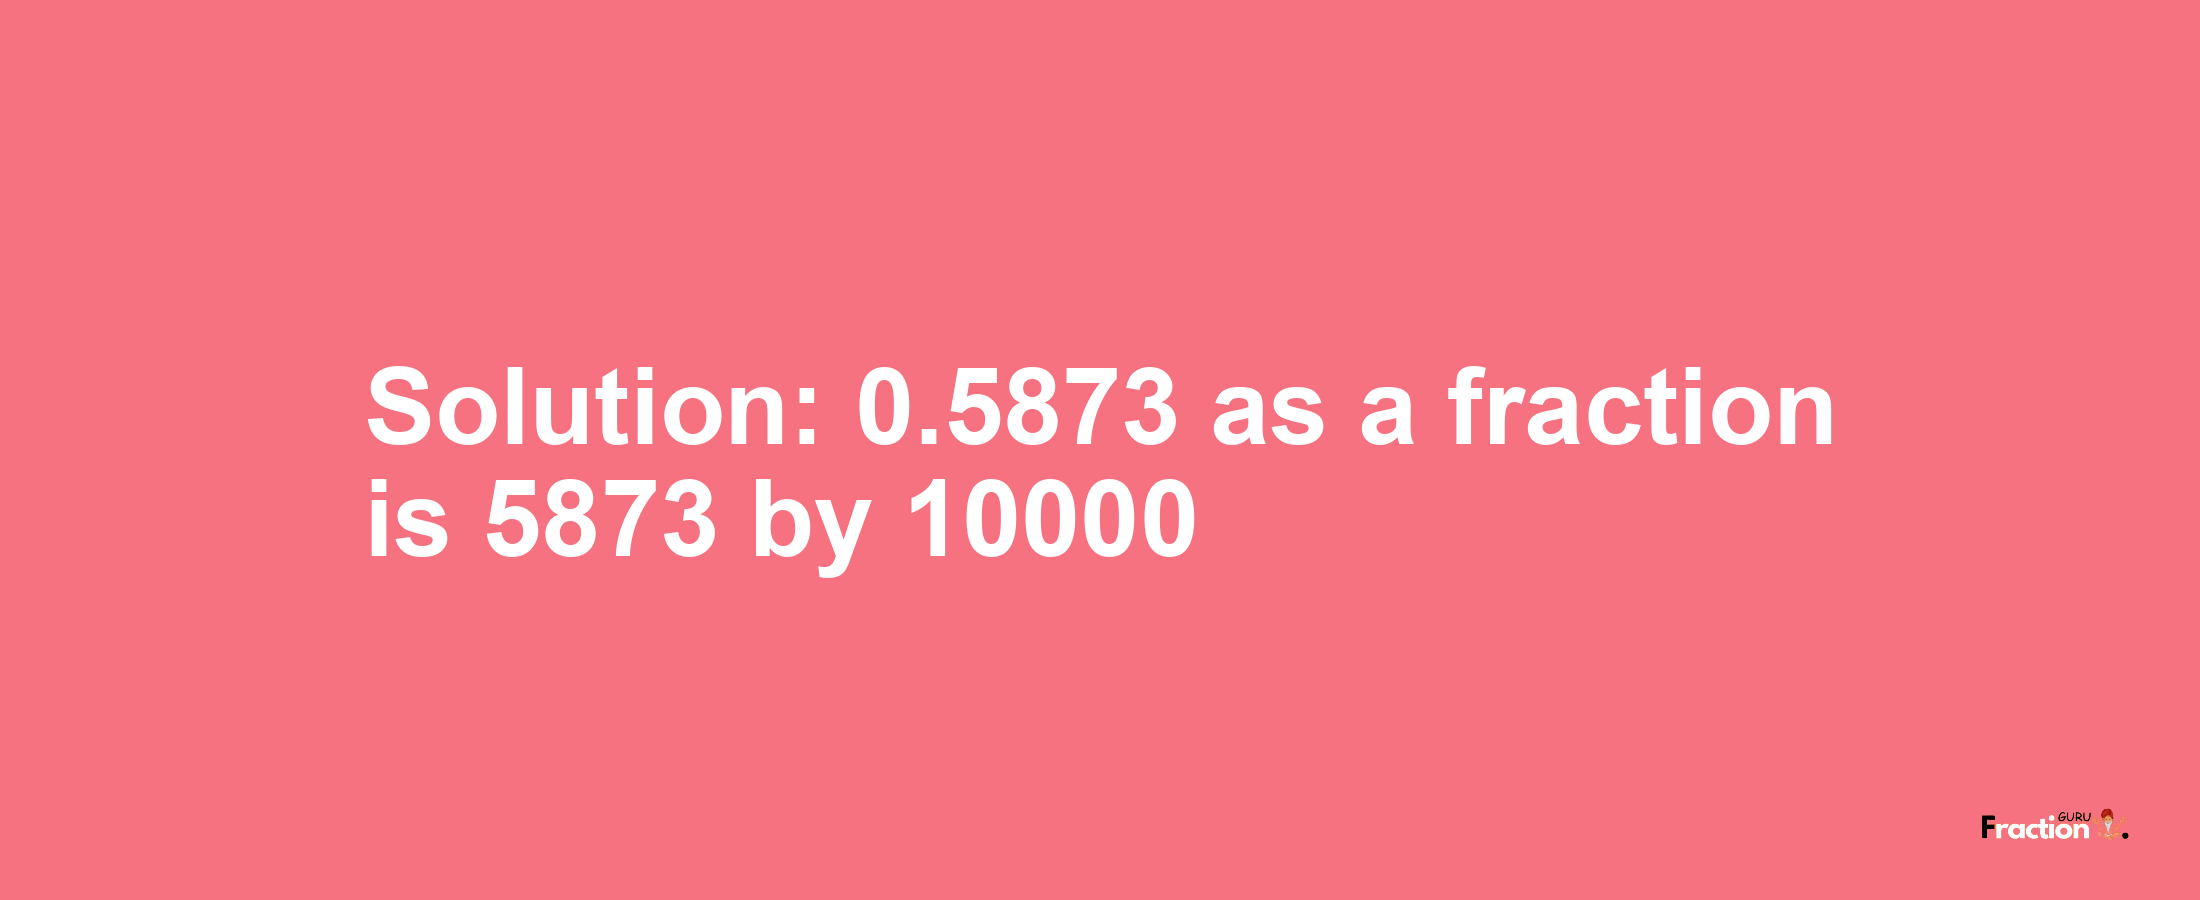 Solution:0.5873 as a fraction is 5873/10000